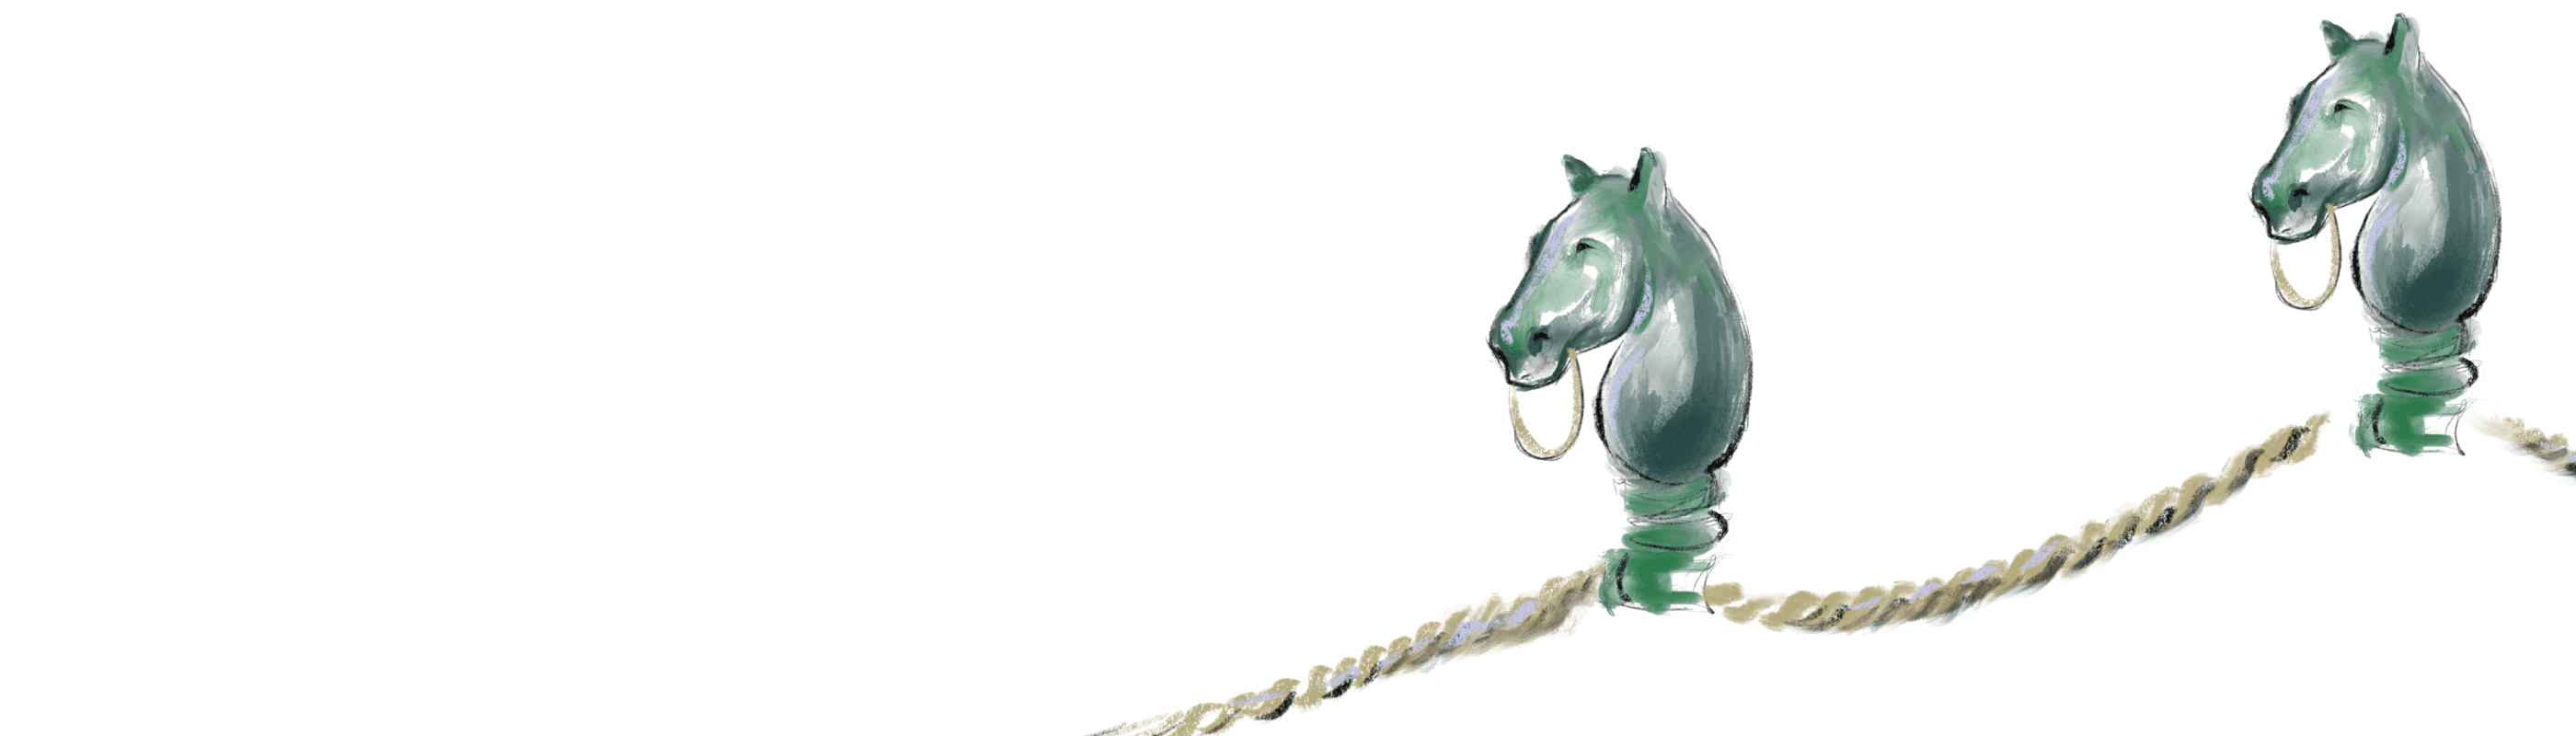 horse and rope illustration